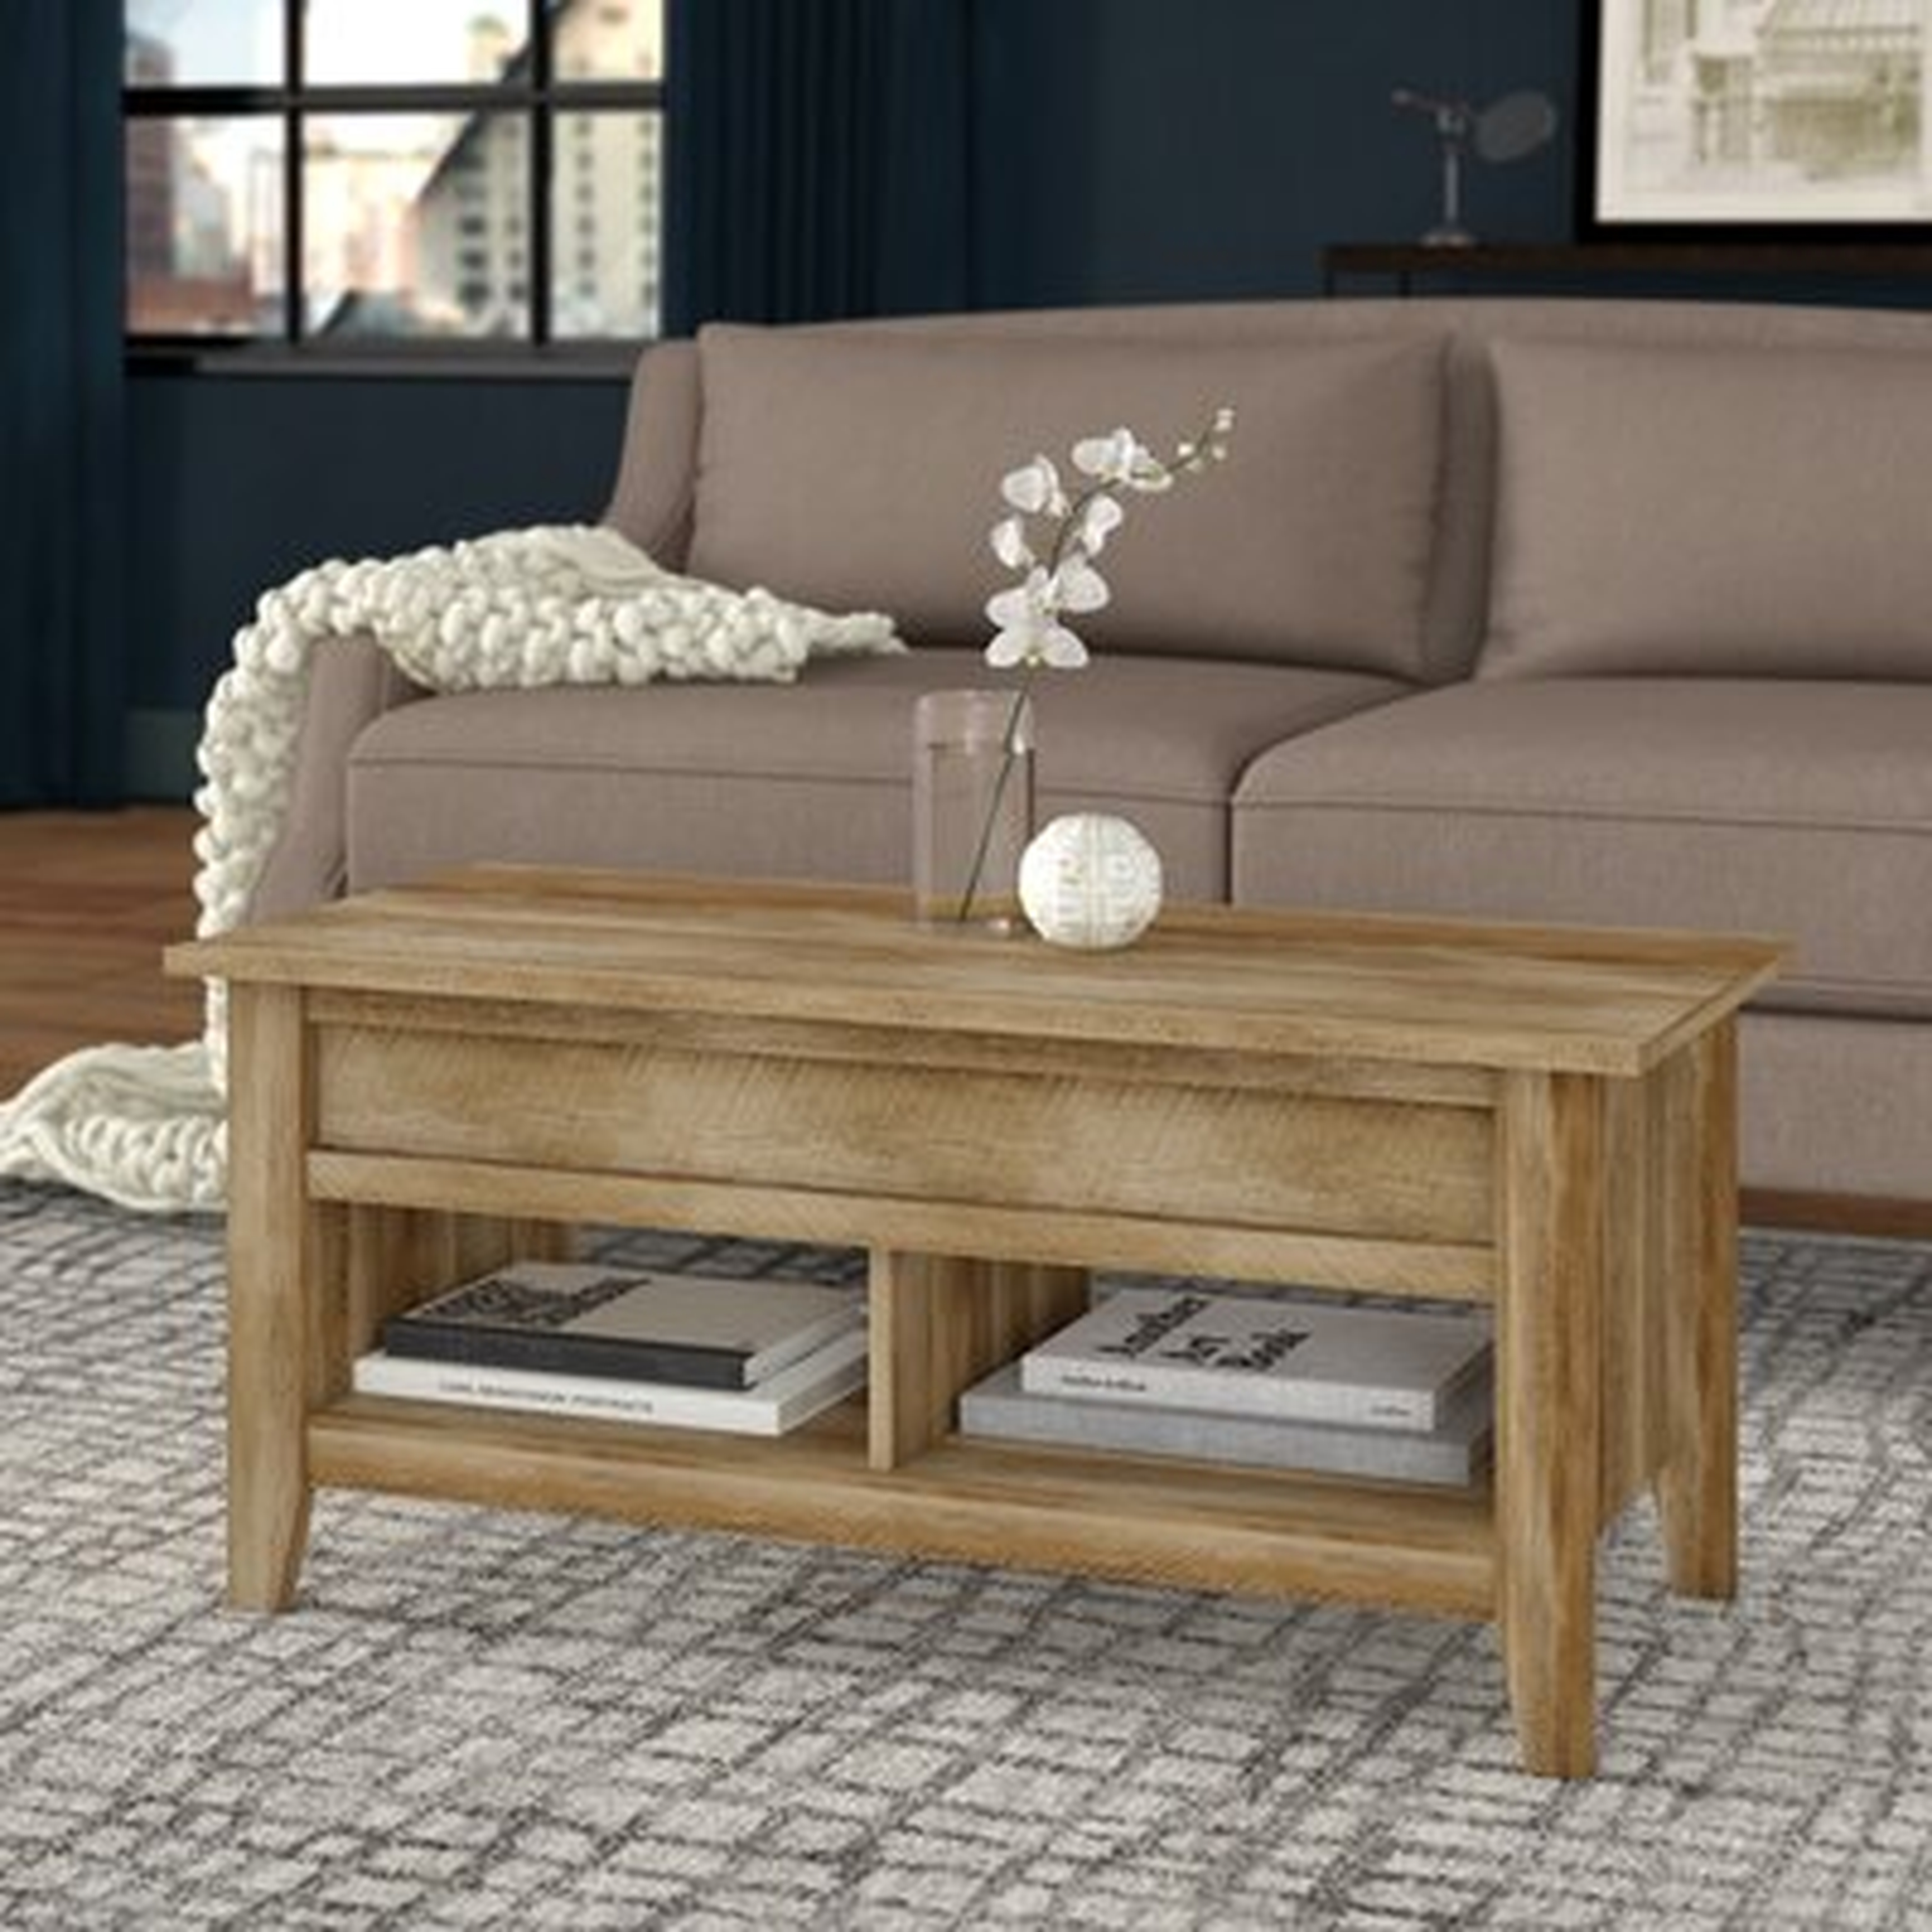 Riddleville Lift Top Extendable 4 Legs Coffee Table with Storage - Wayfair